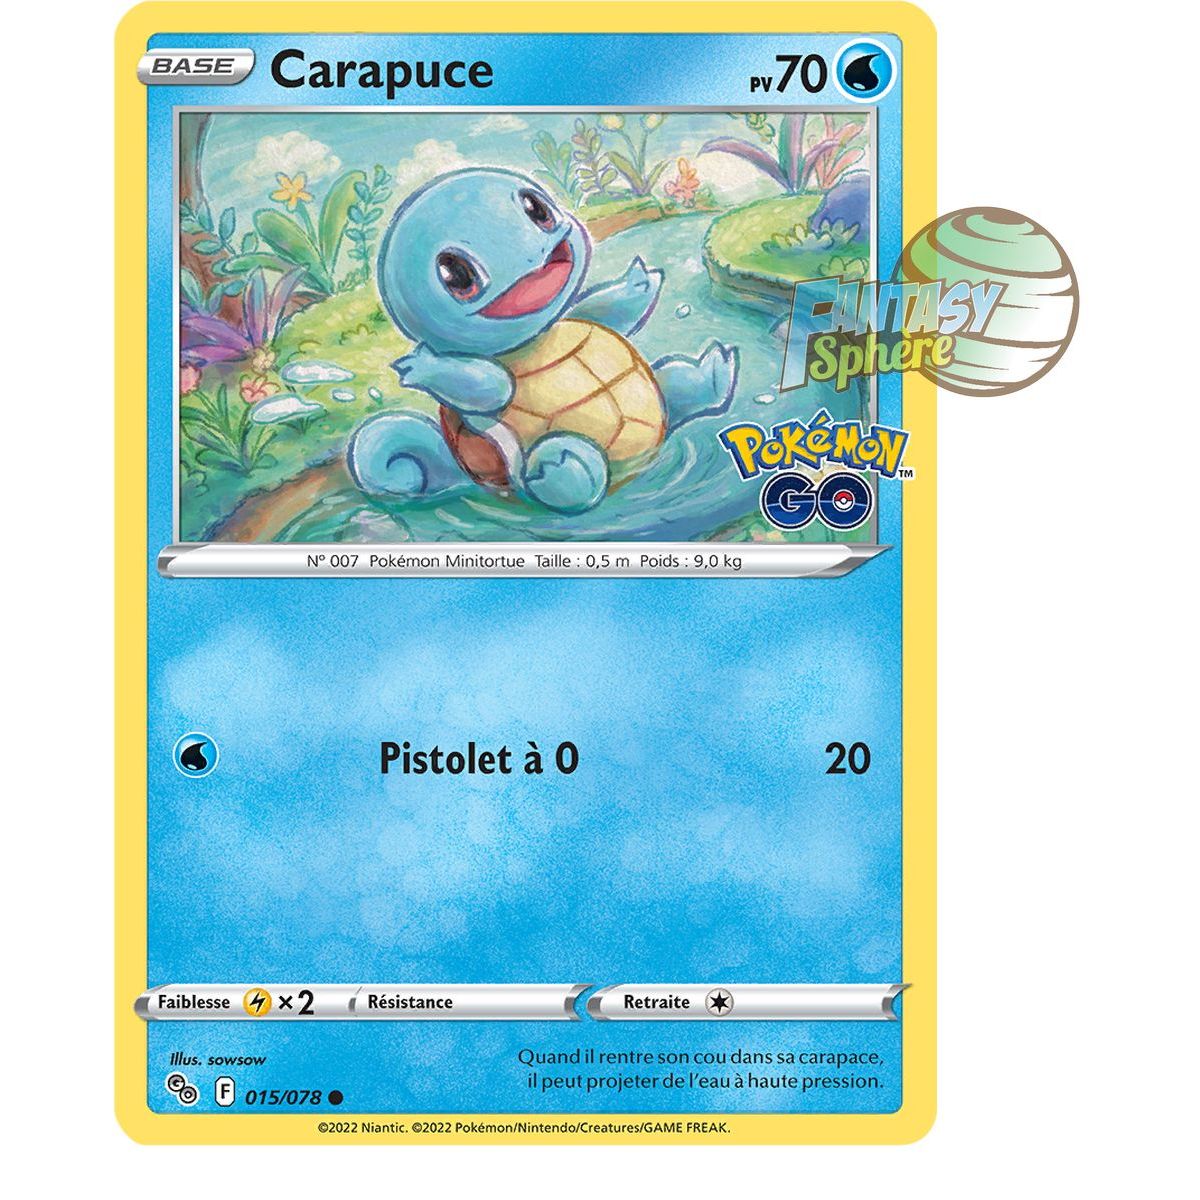 Squirtle - Common 15/78 - Sword and Shield 10.5 Pokemon GO